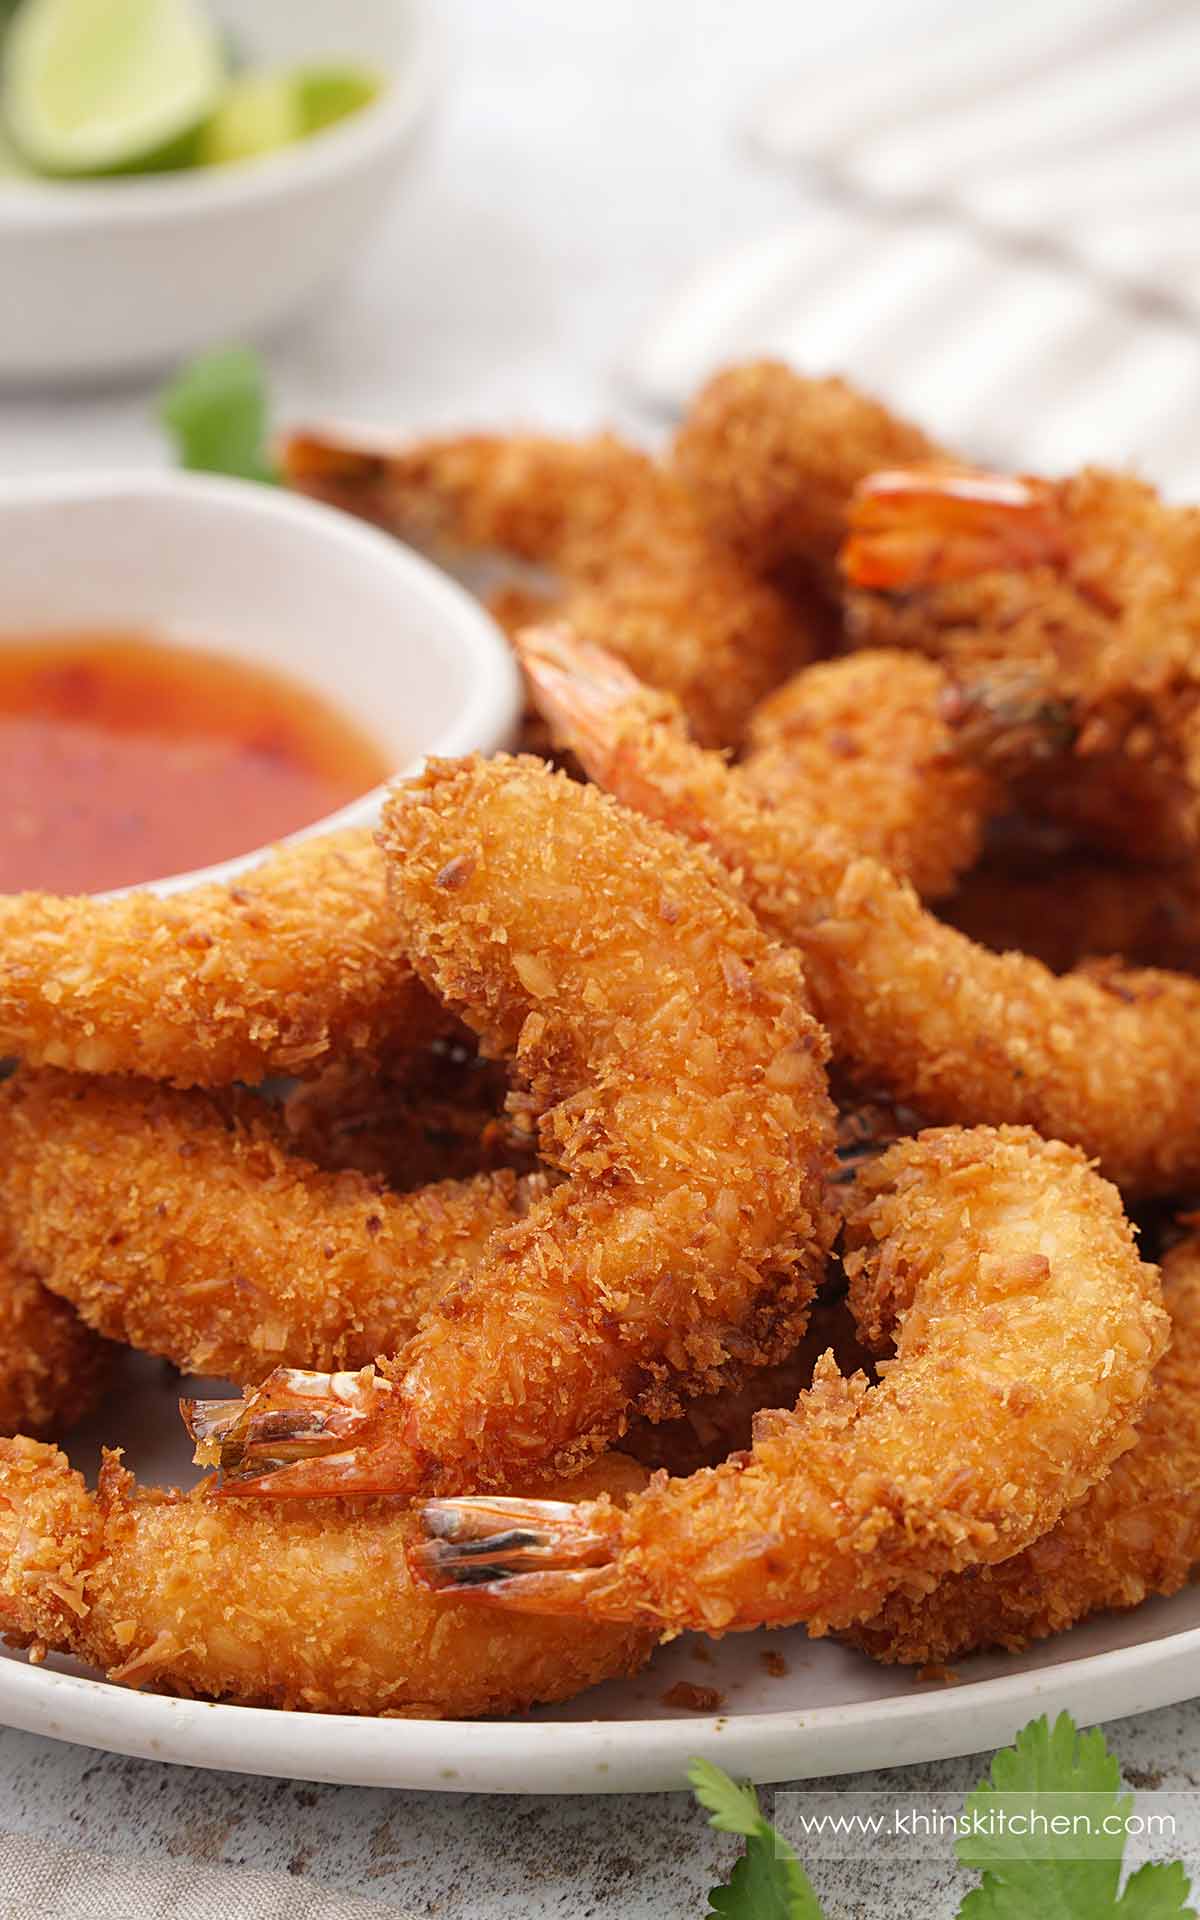 A white plate containing, fried crispy prawn with sweet chilli dipping sauce on the side.